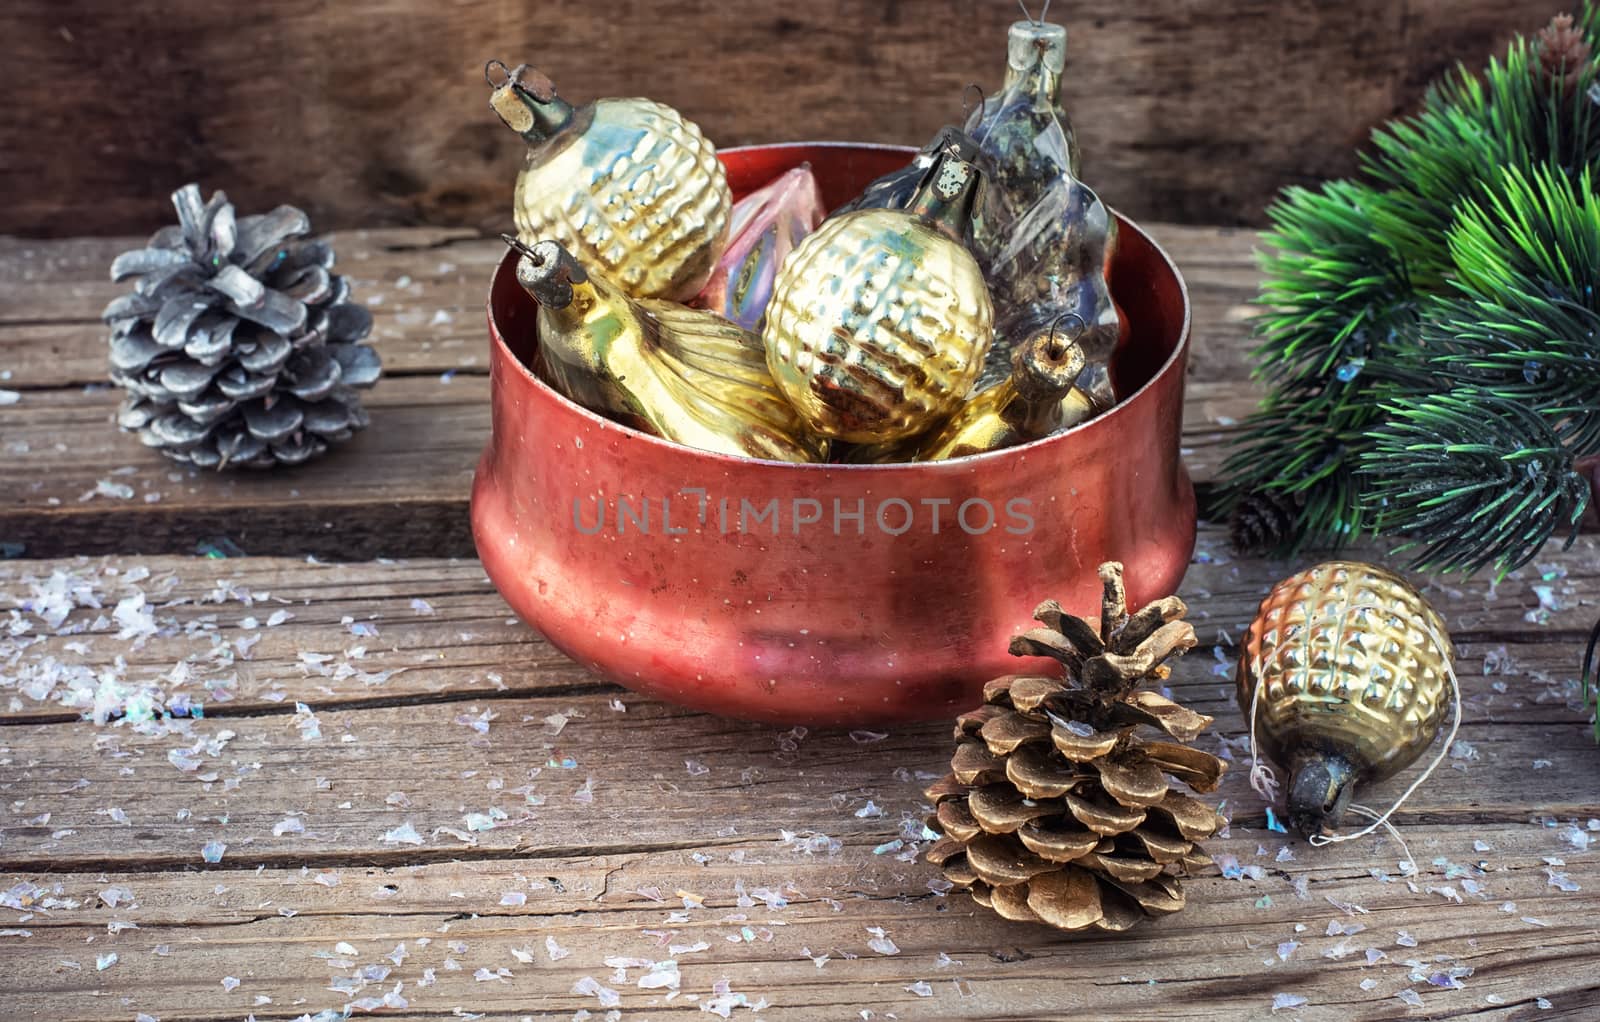 Festive Christmas decorations on wooden background in vintage style.Photo tinted.